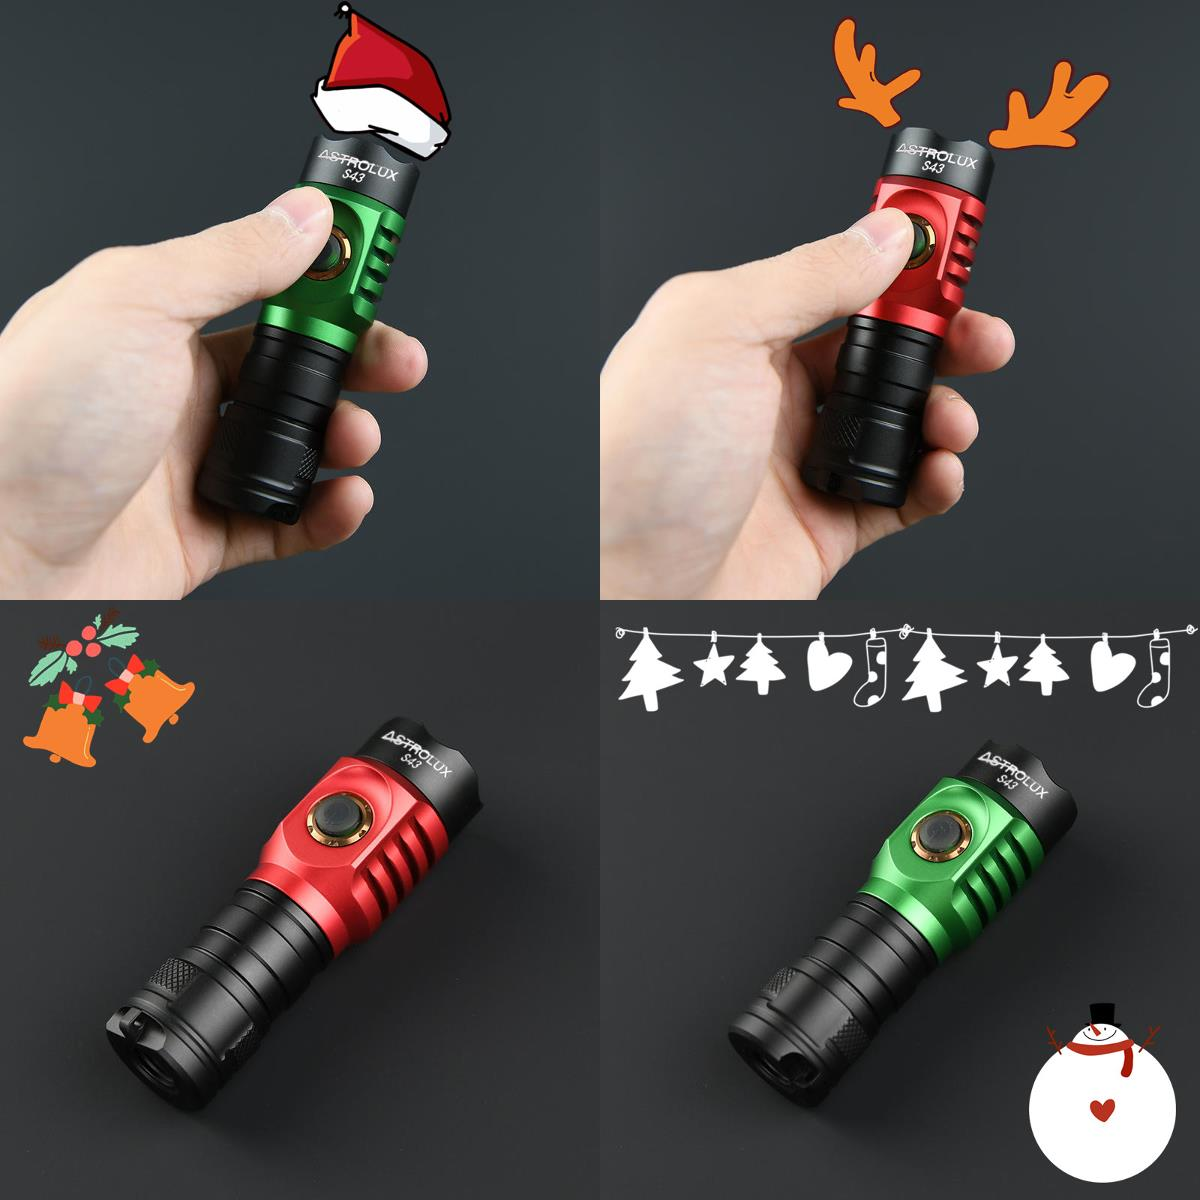 best price,astrolux,s43,christmas,version,xp,g3,red,flashlight,discount